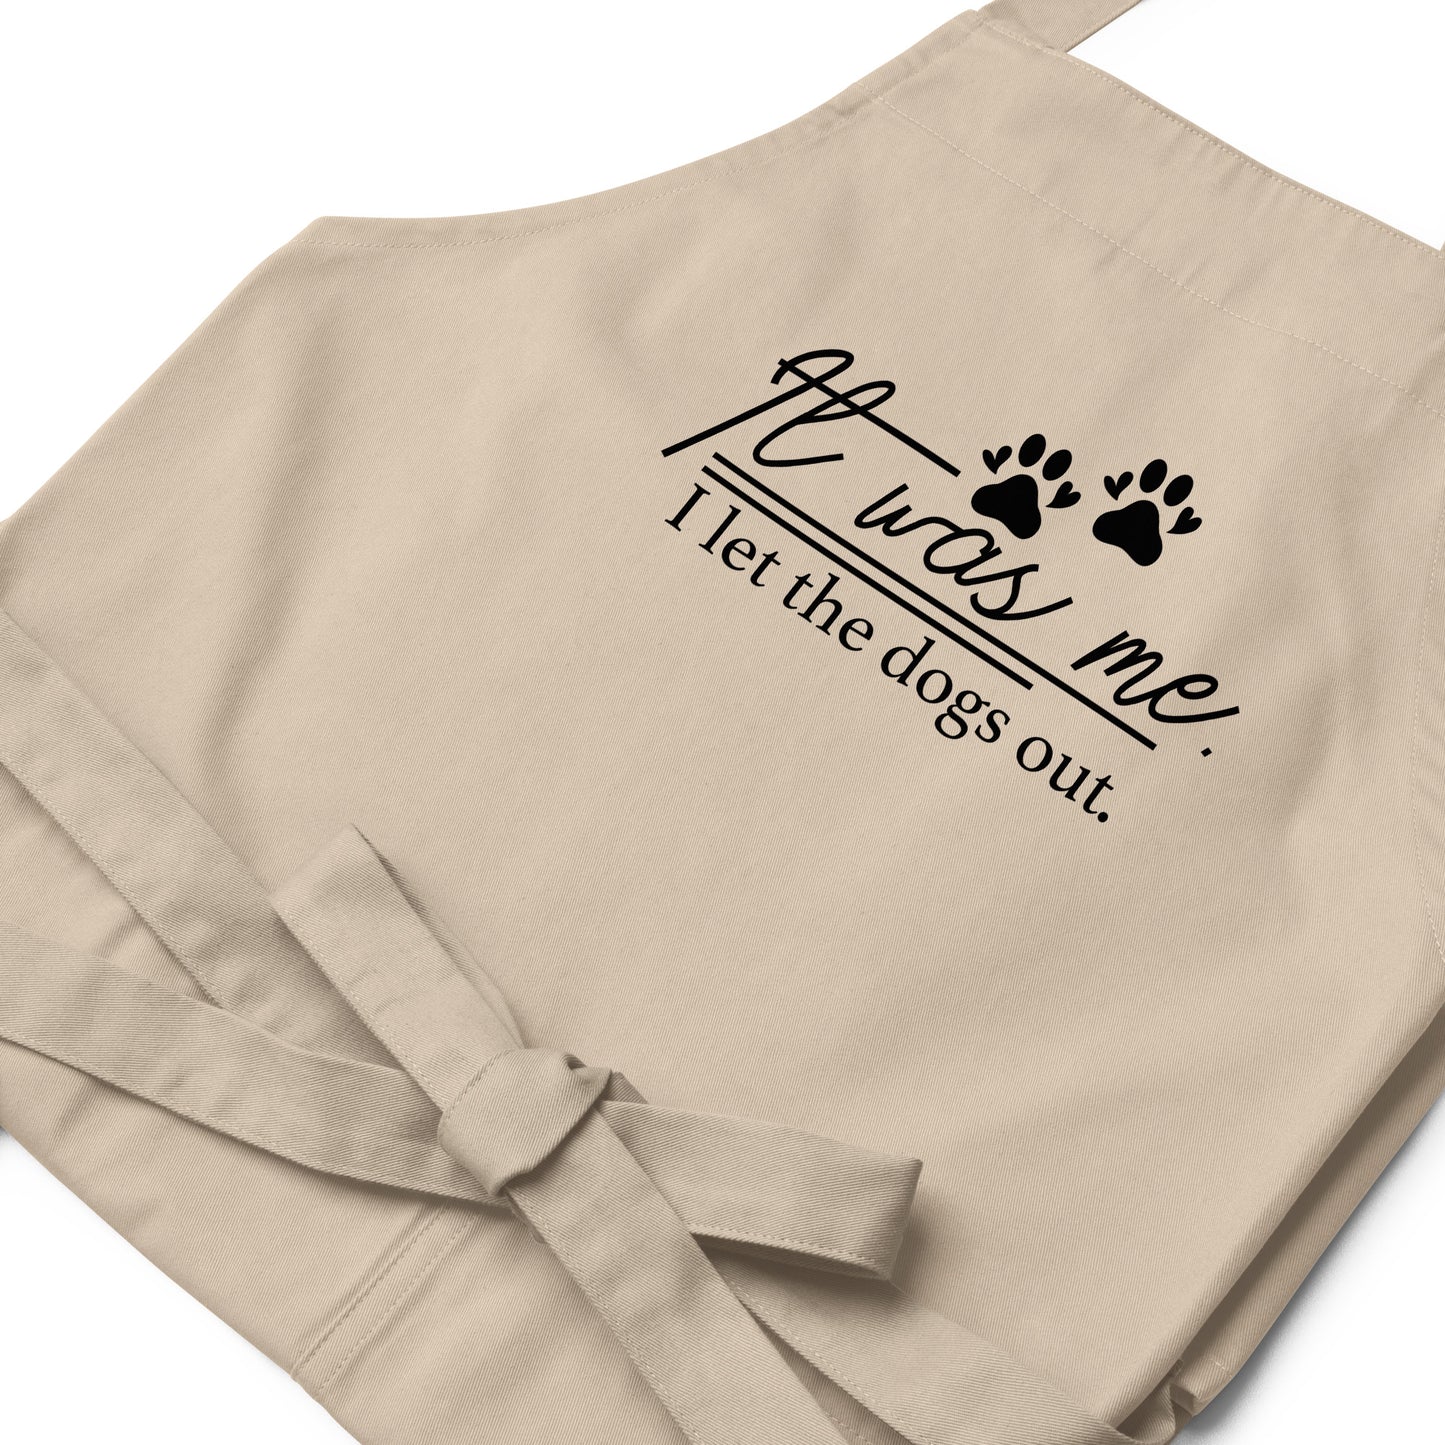 It Was Me I Let the Dogs Out Organic cotton apron